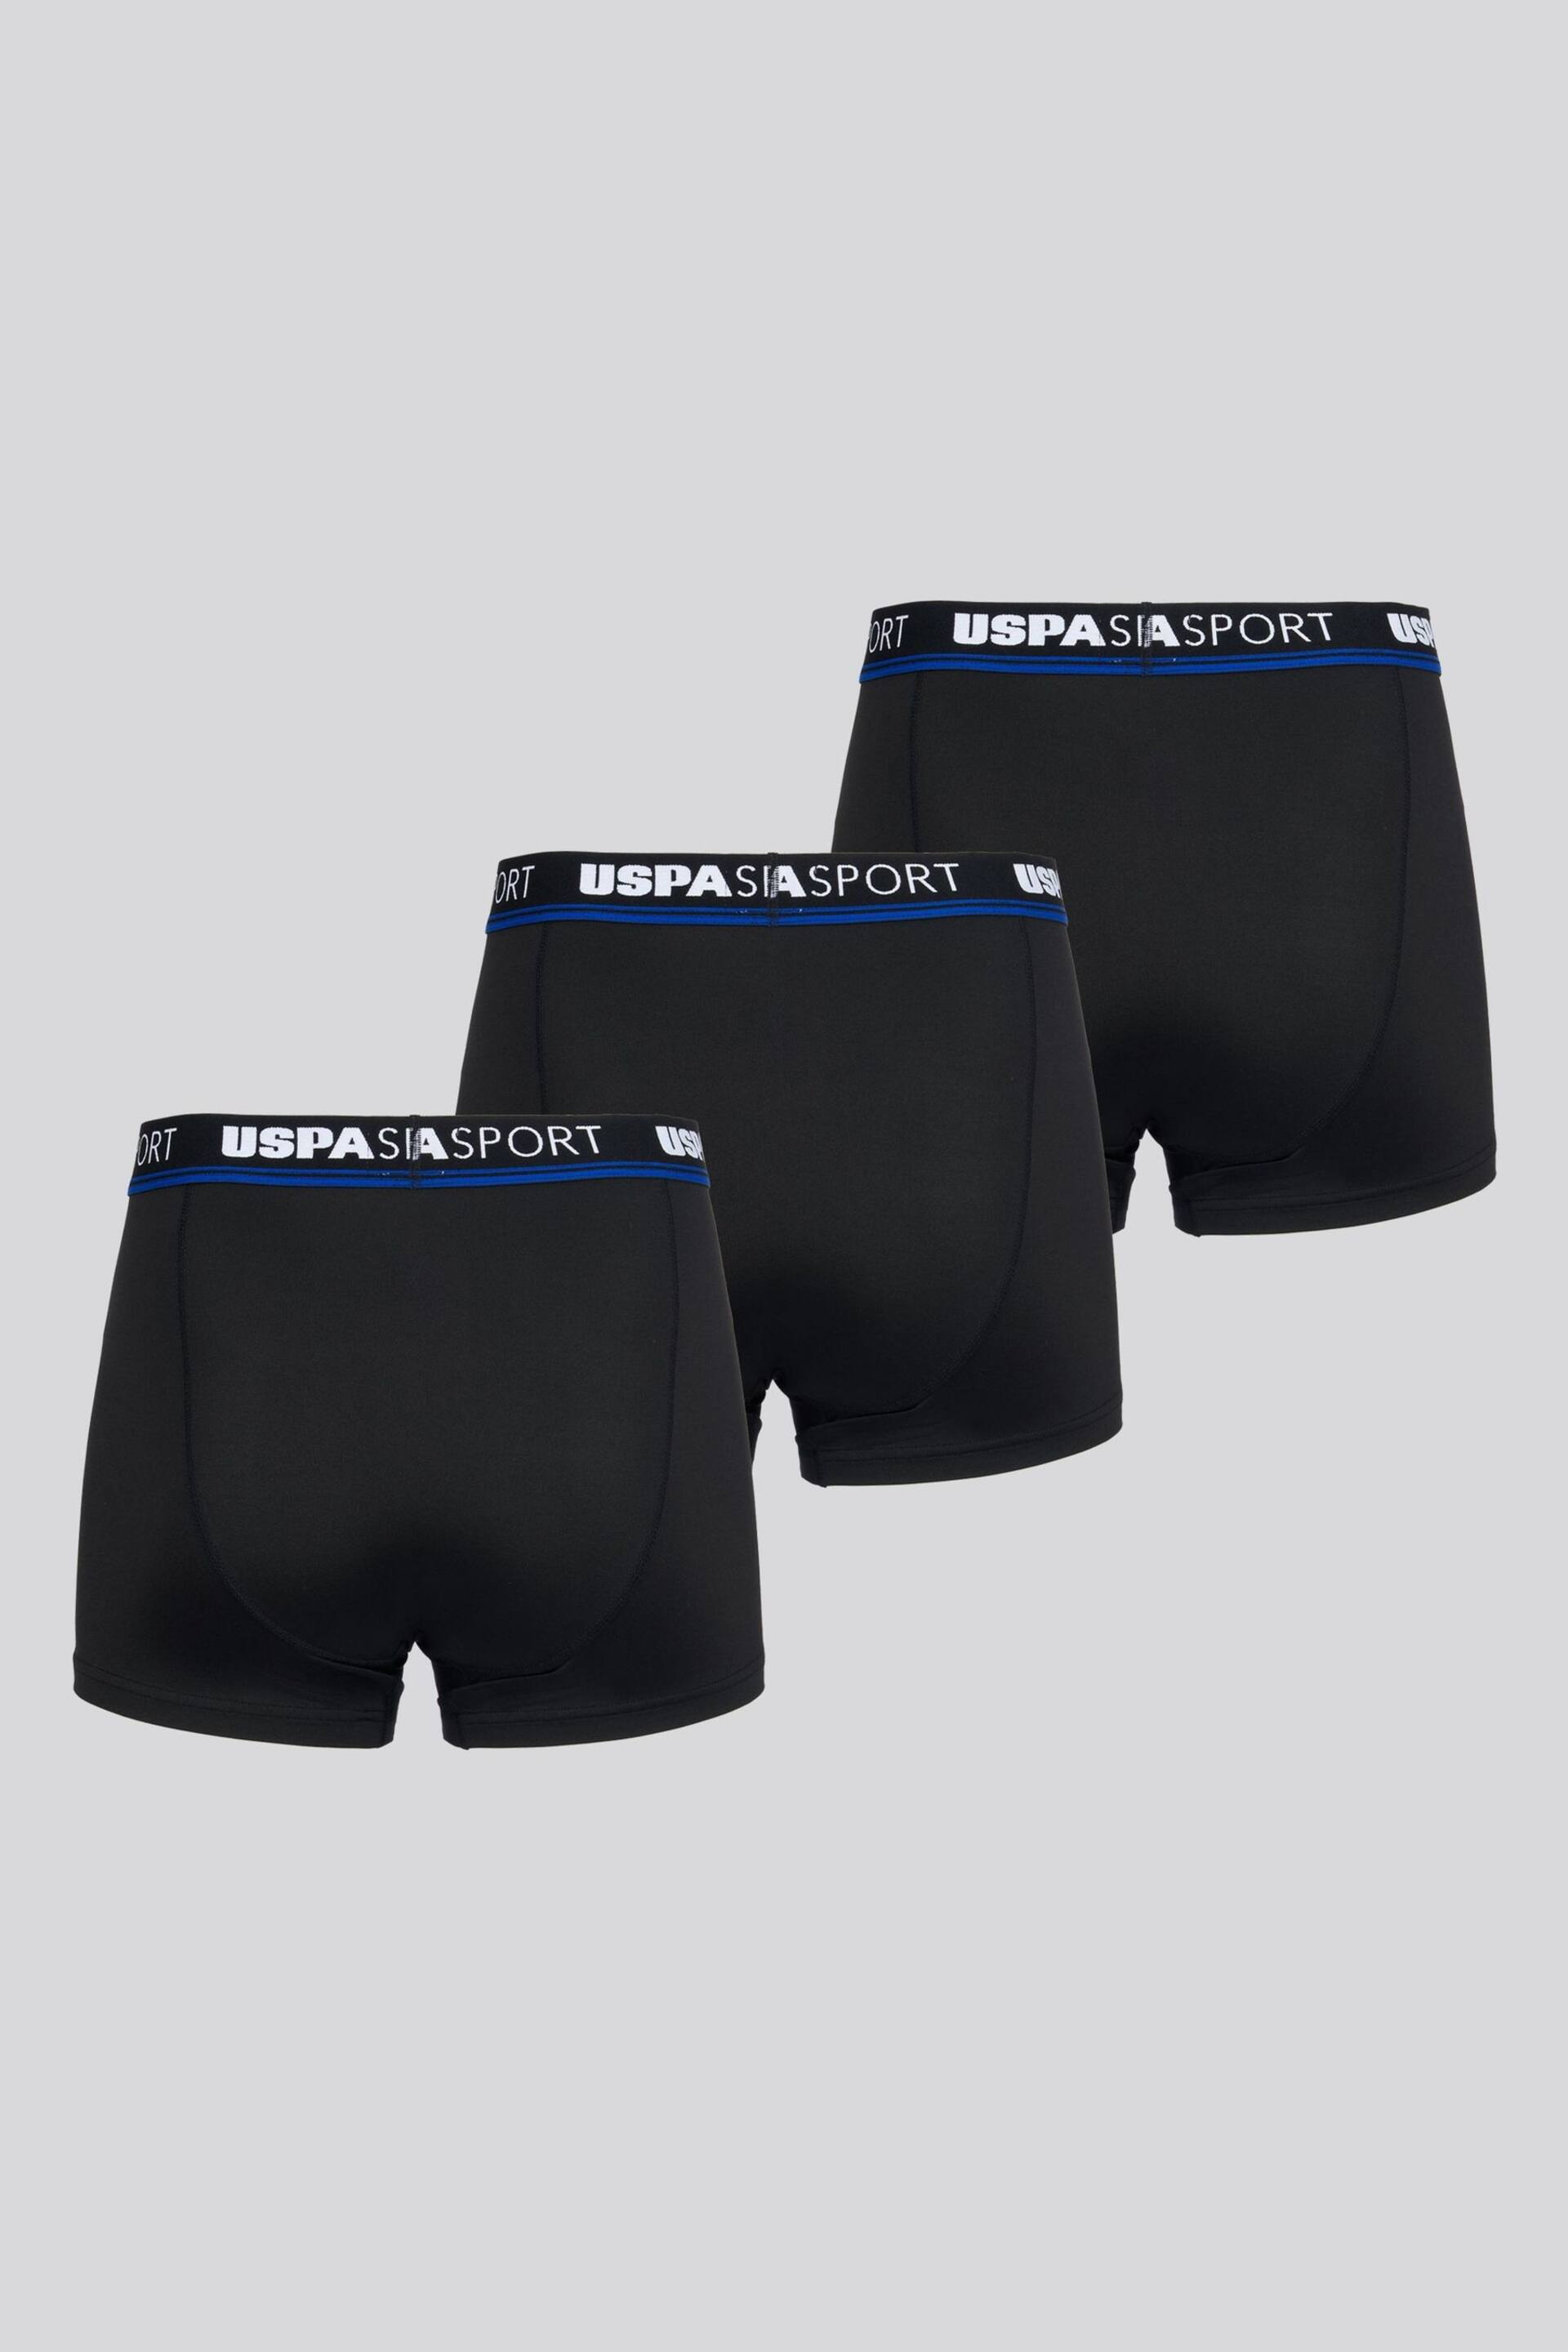 U.S. Polo Assn. Mens Sports Boxer Black Shorts 3 Pack - Image 7 of 8